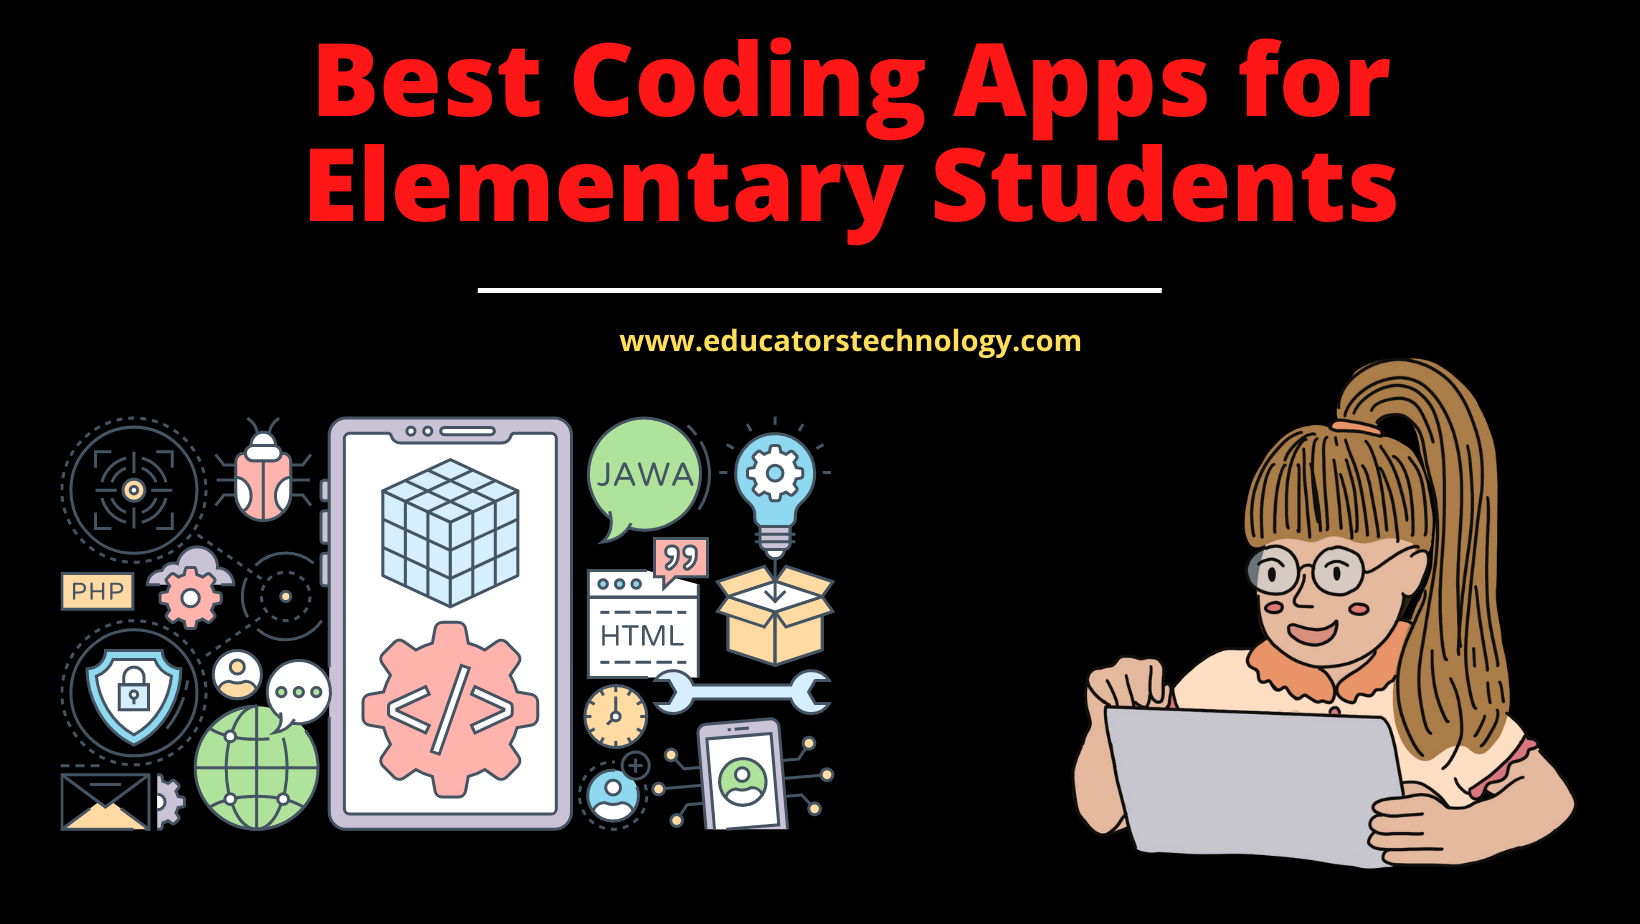 Coding apps for elementary students